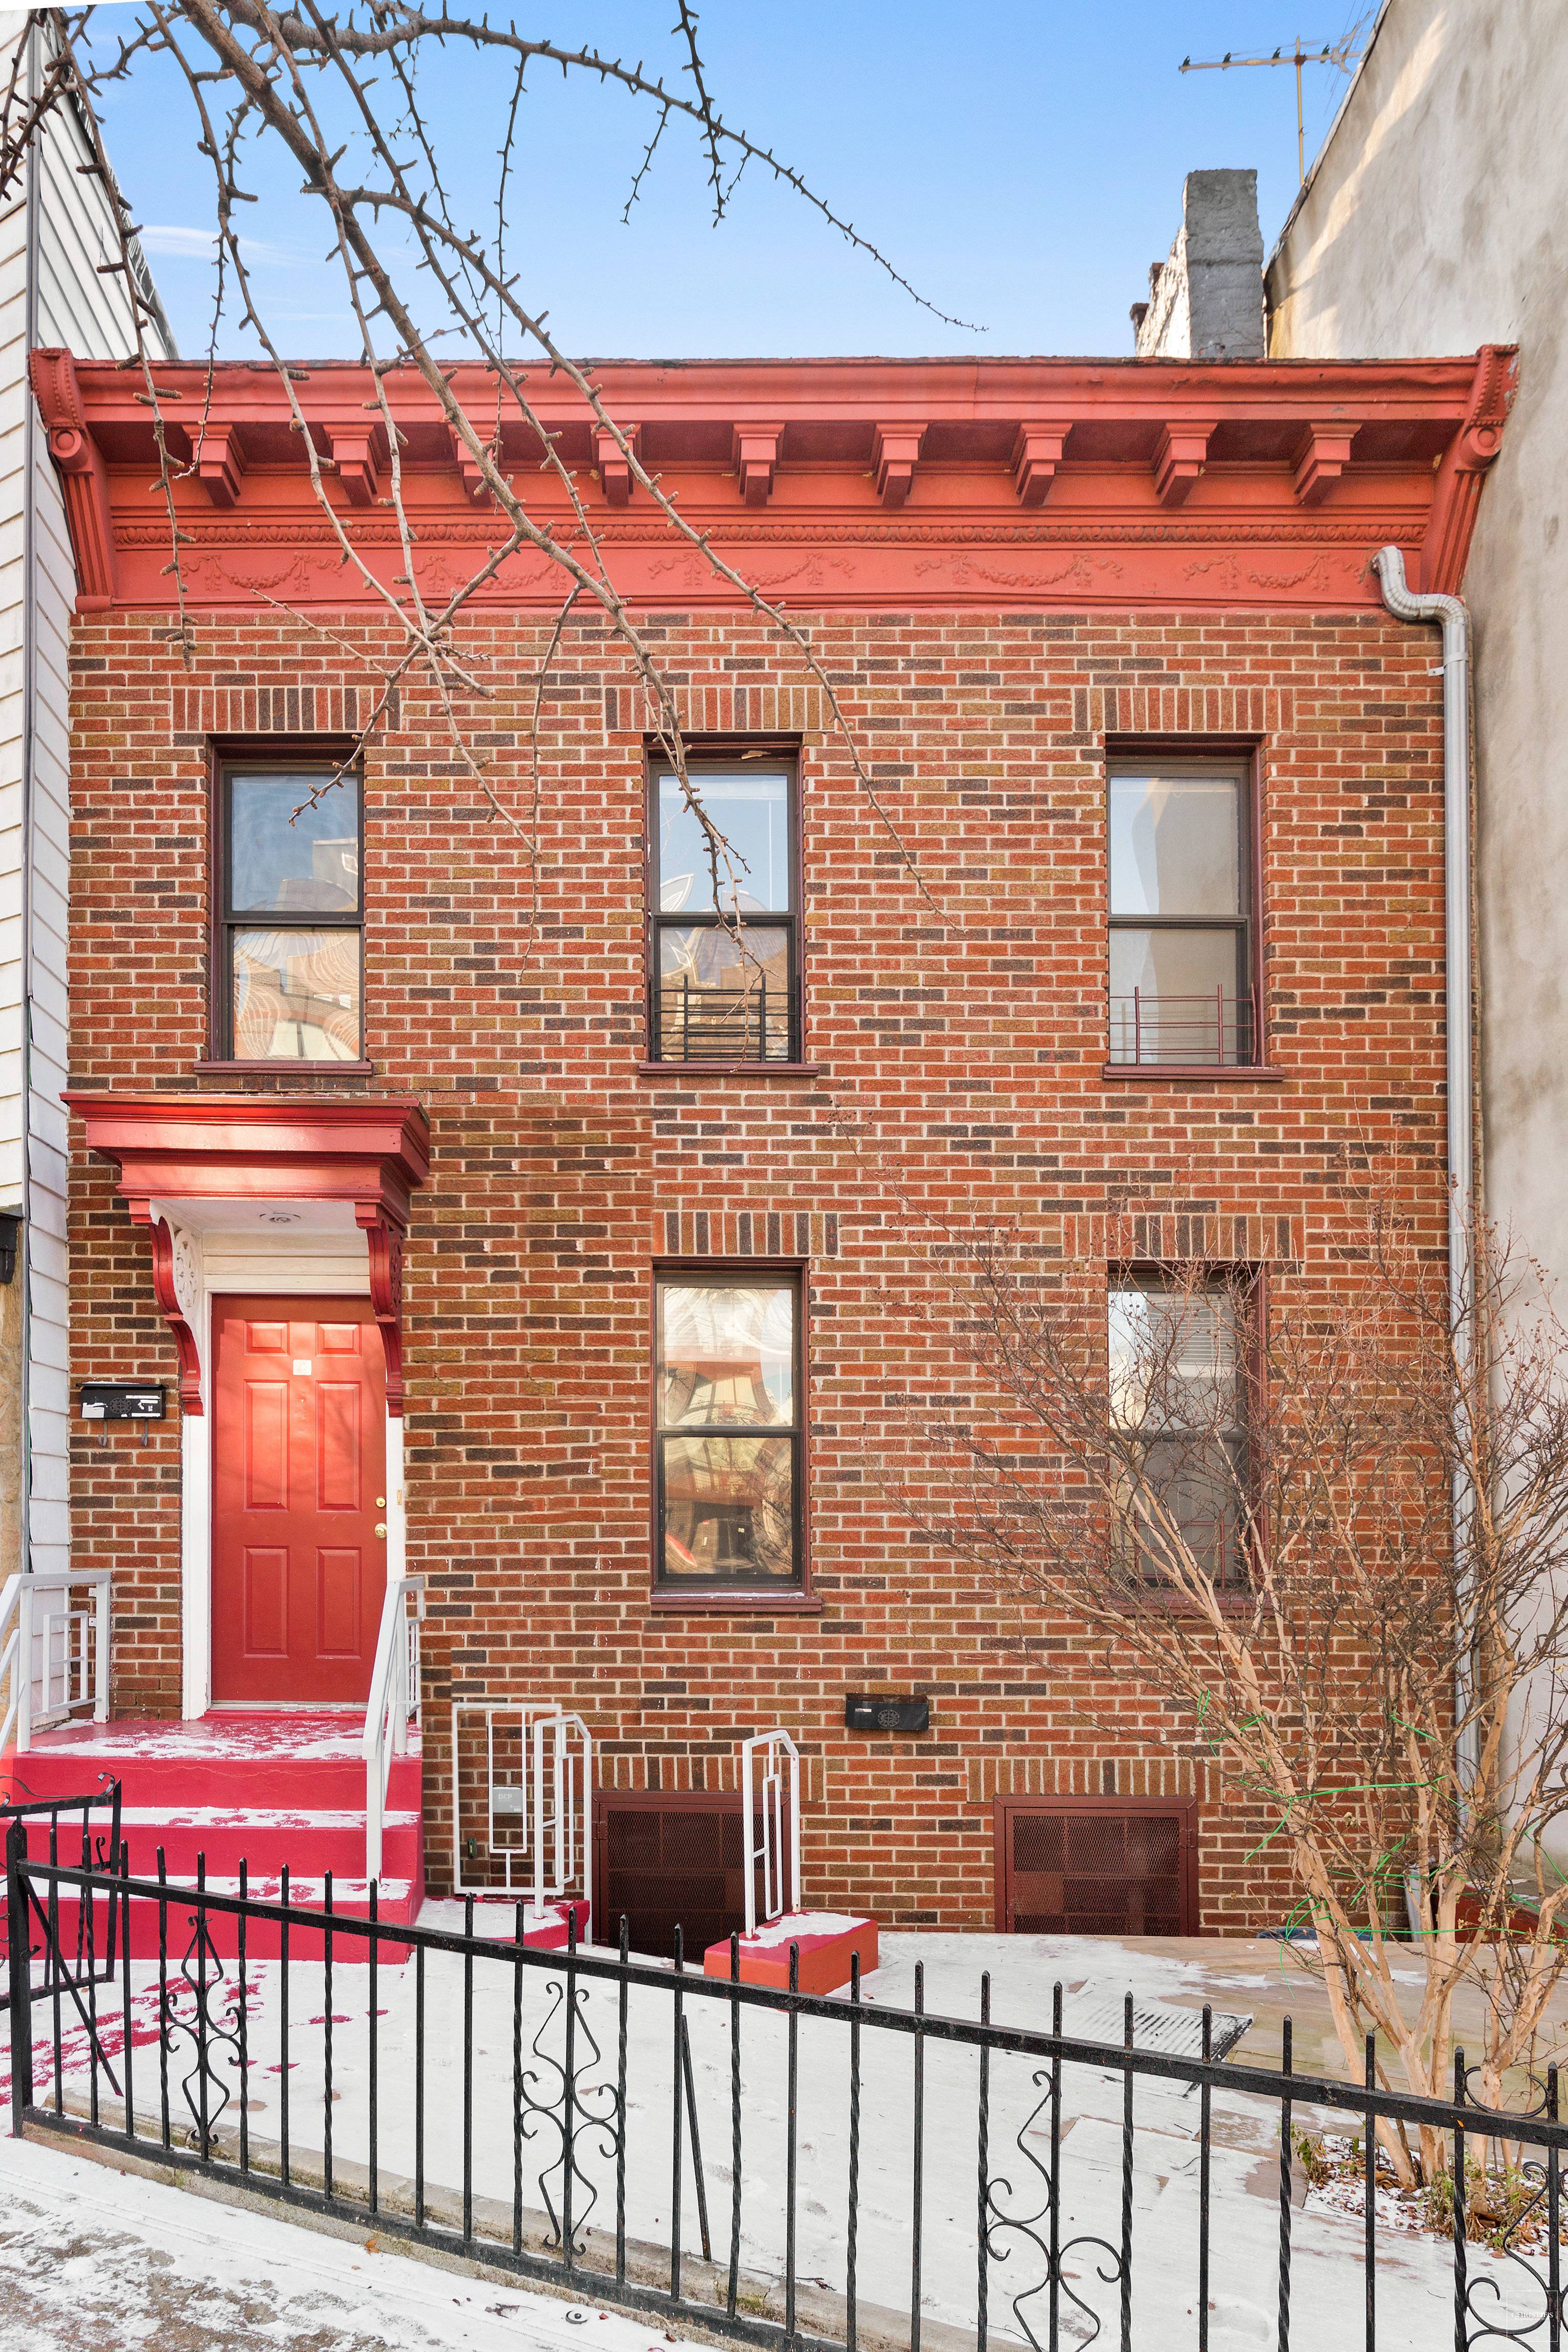 736 Bergen Street is a full three story townhouse located in the quaint Brooklyn neighborhood of Prospect Heights.